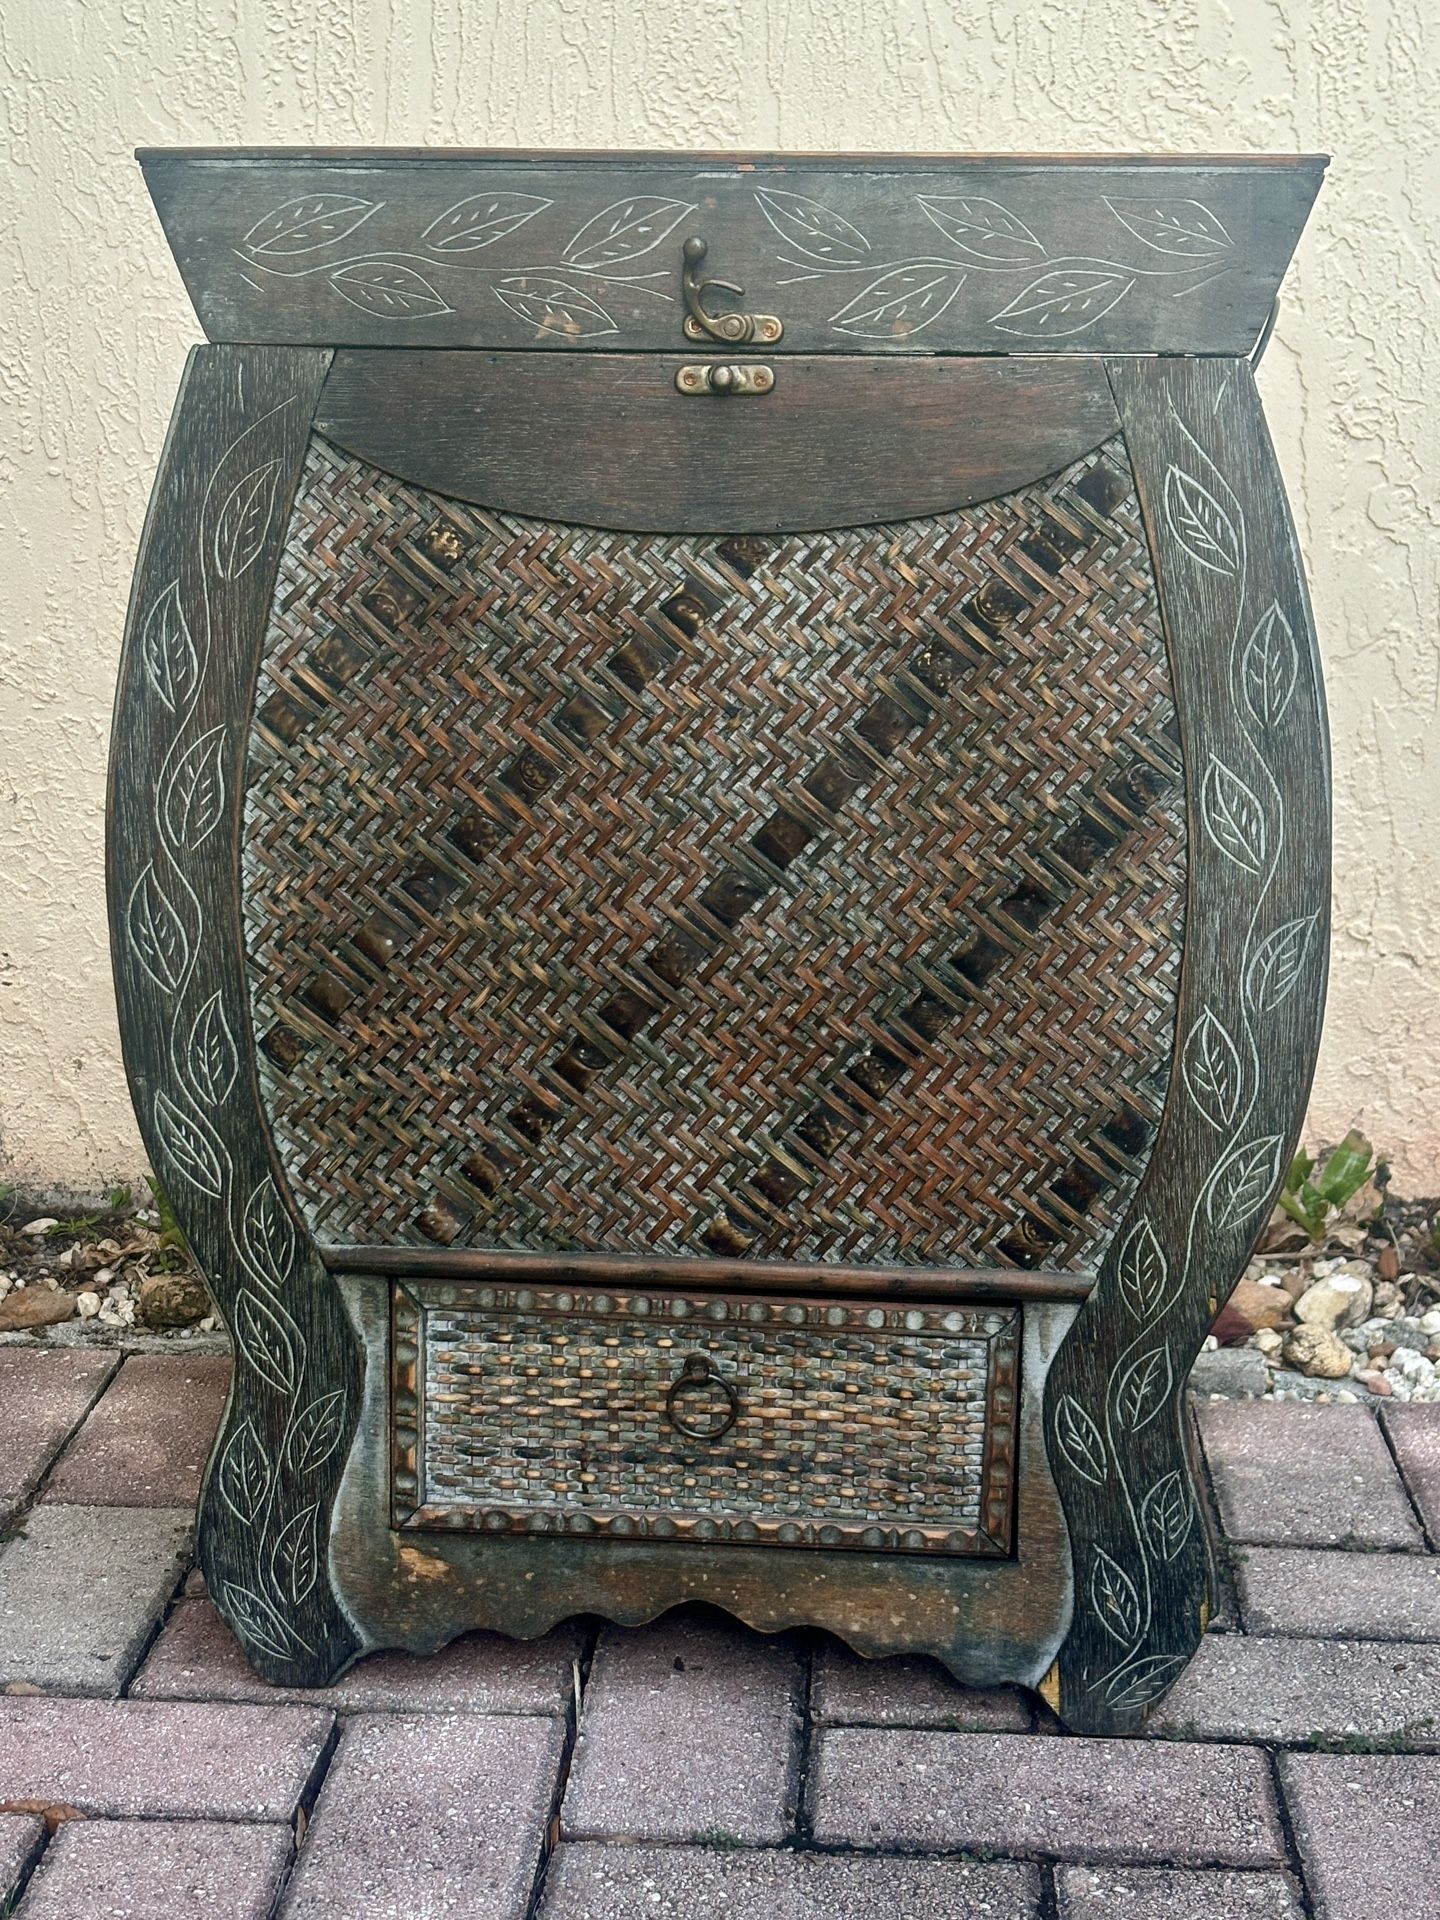 Bali style Wicker storage cabinet with drawer, Handles, And Locker